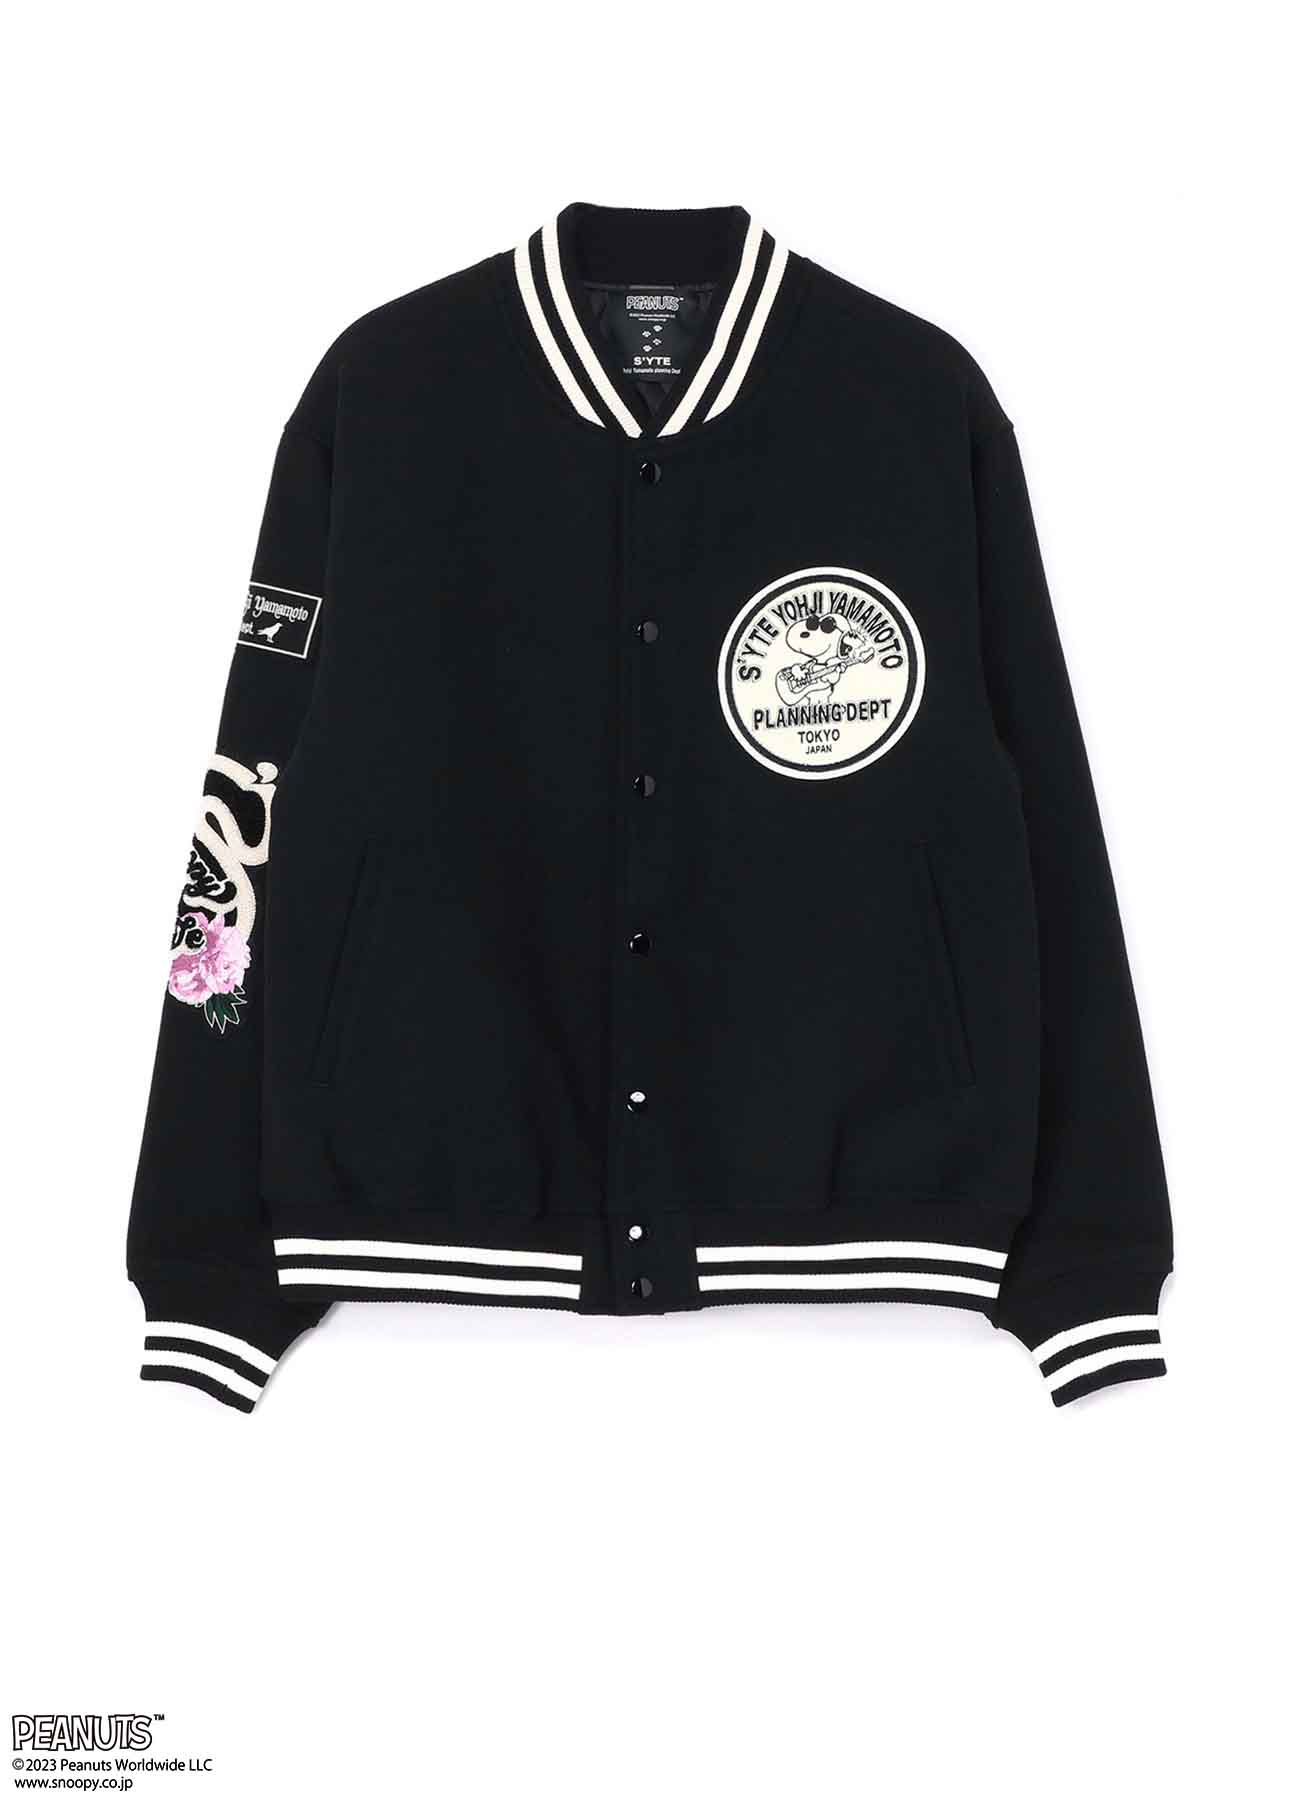 S'YTE x PEANUTS  MELTON VARSITY JACKET WITH PEANUTS COLLABORATION PATCH DESIGN